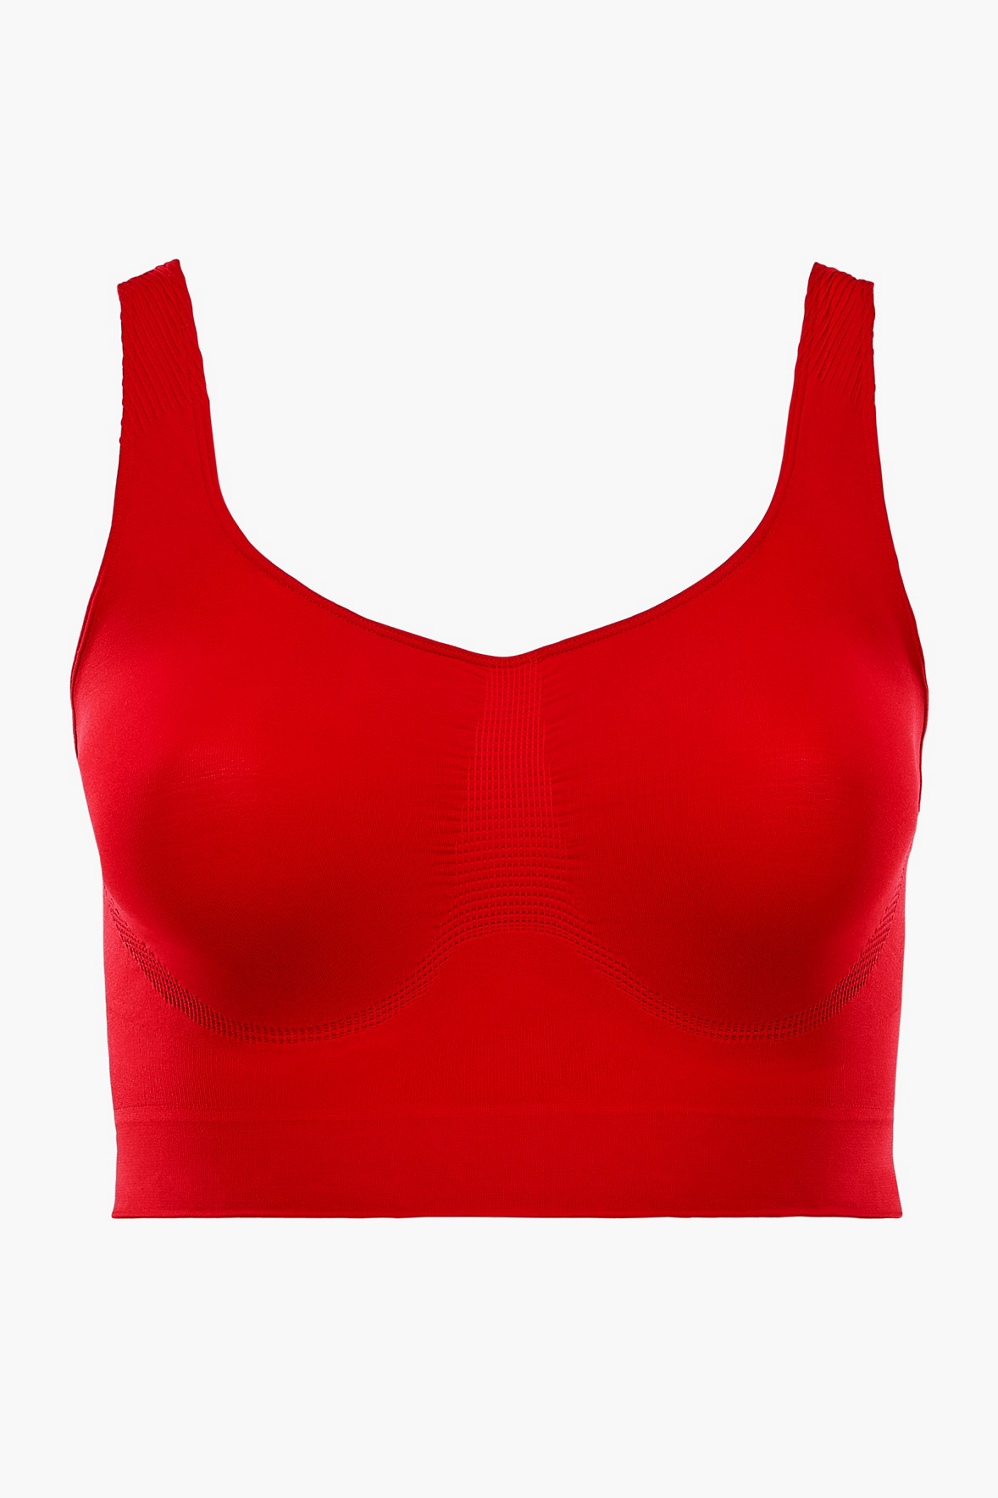 Buy Diloty Apparela Simple Red Bra for Womens and Girls in 2029 at